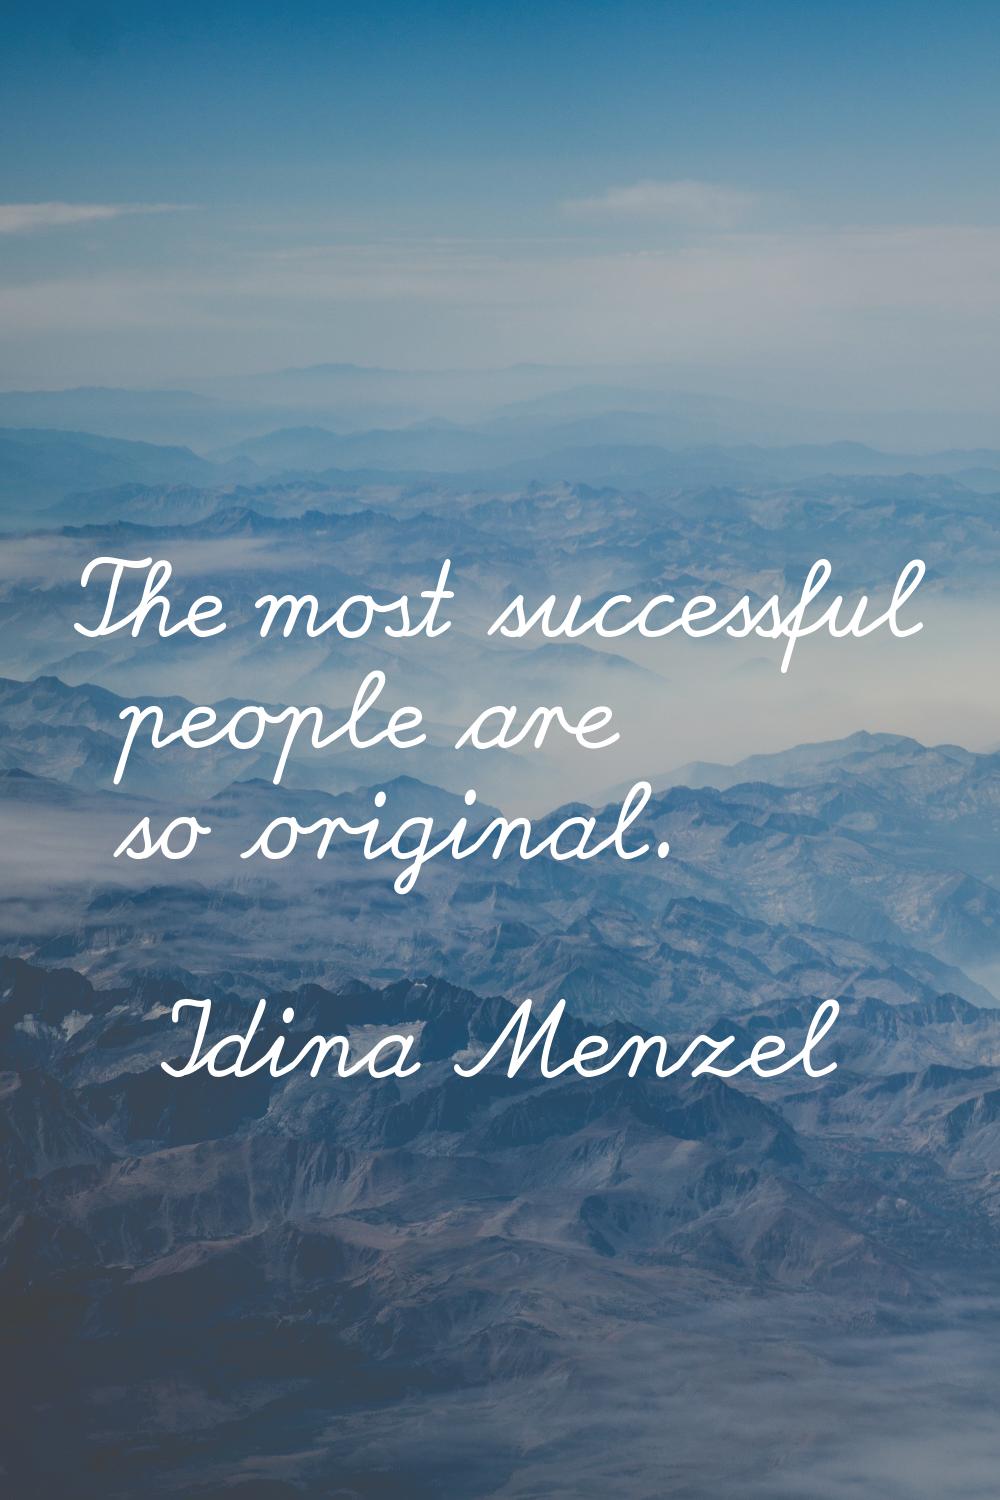 The most successful people are so original.